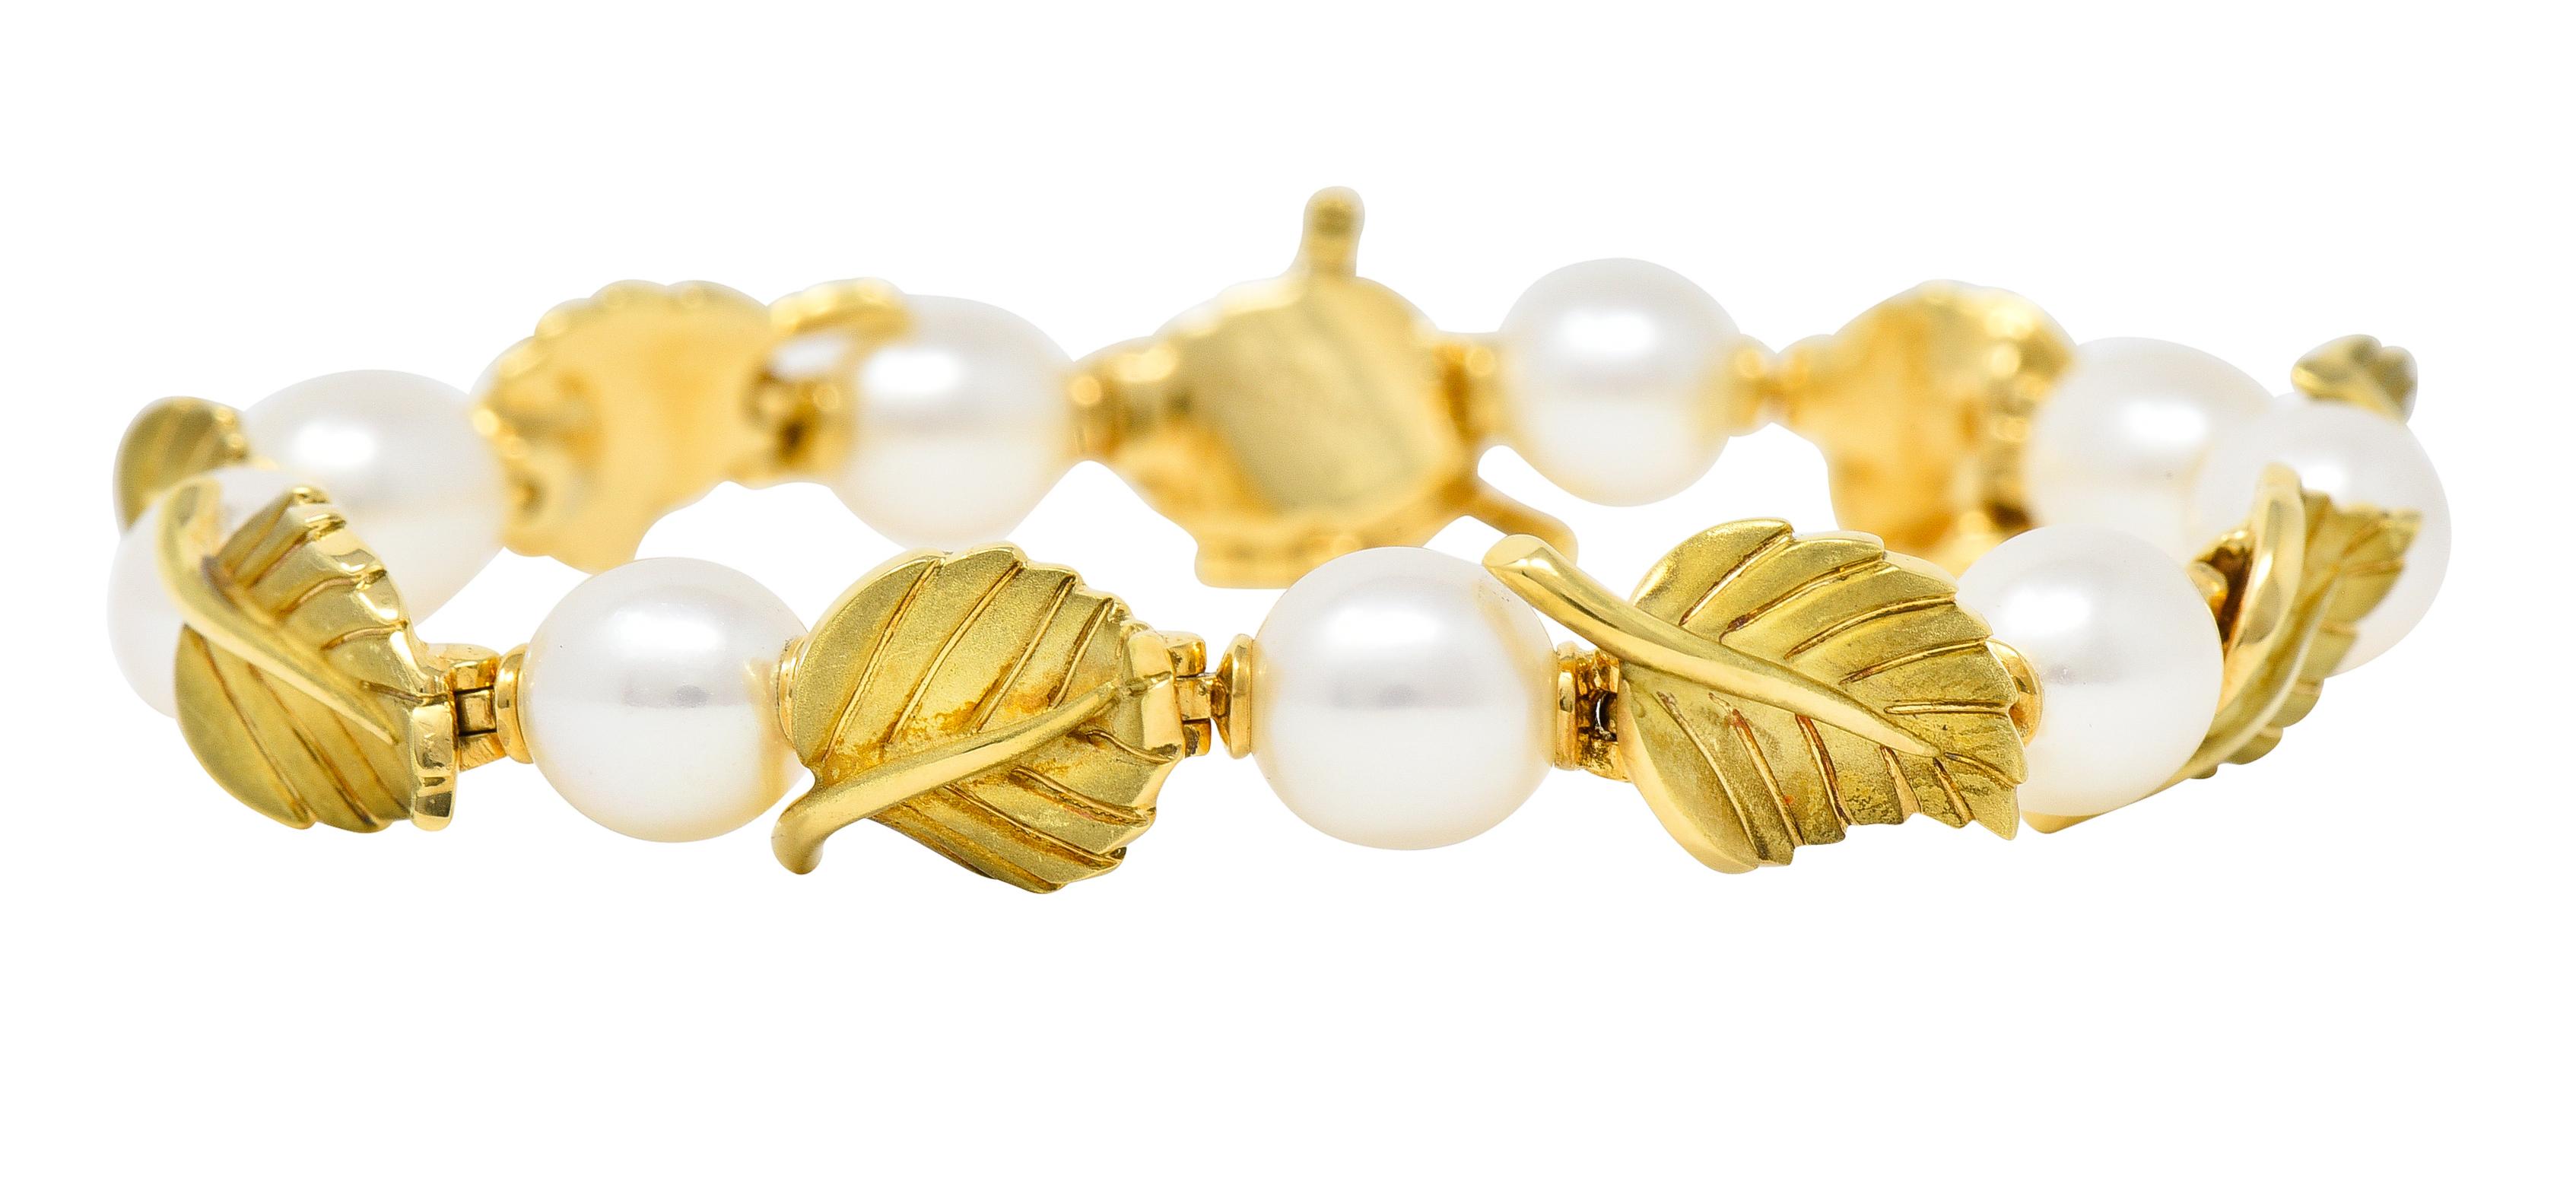 Featuring 7.0 mm near-round cultured pearl beads - white with moderate iridescence. Alternating with hinged gold leaf motif links - matte with engraved veins. Dimensional with furling edges and raised stems. Completed by concealed clasp. Stamped 750